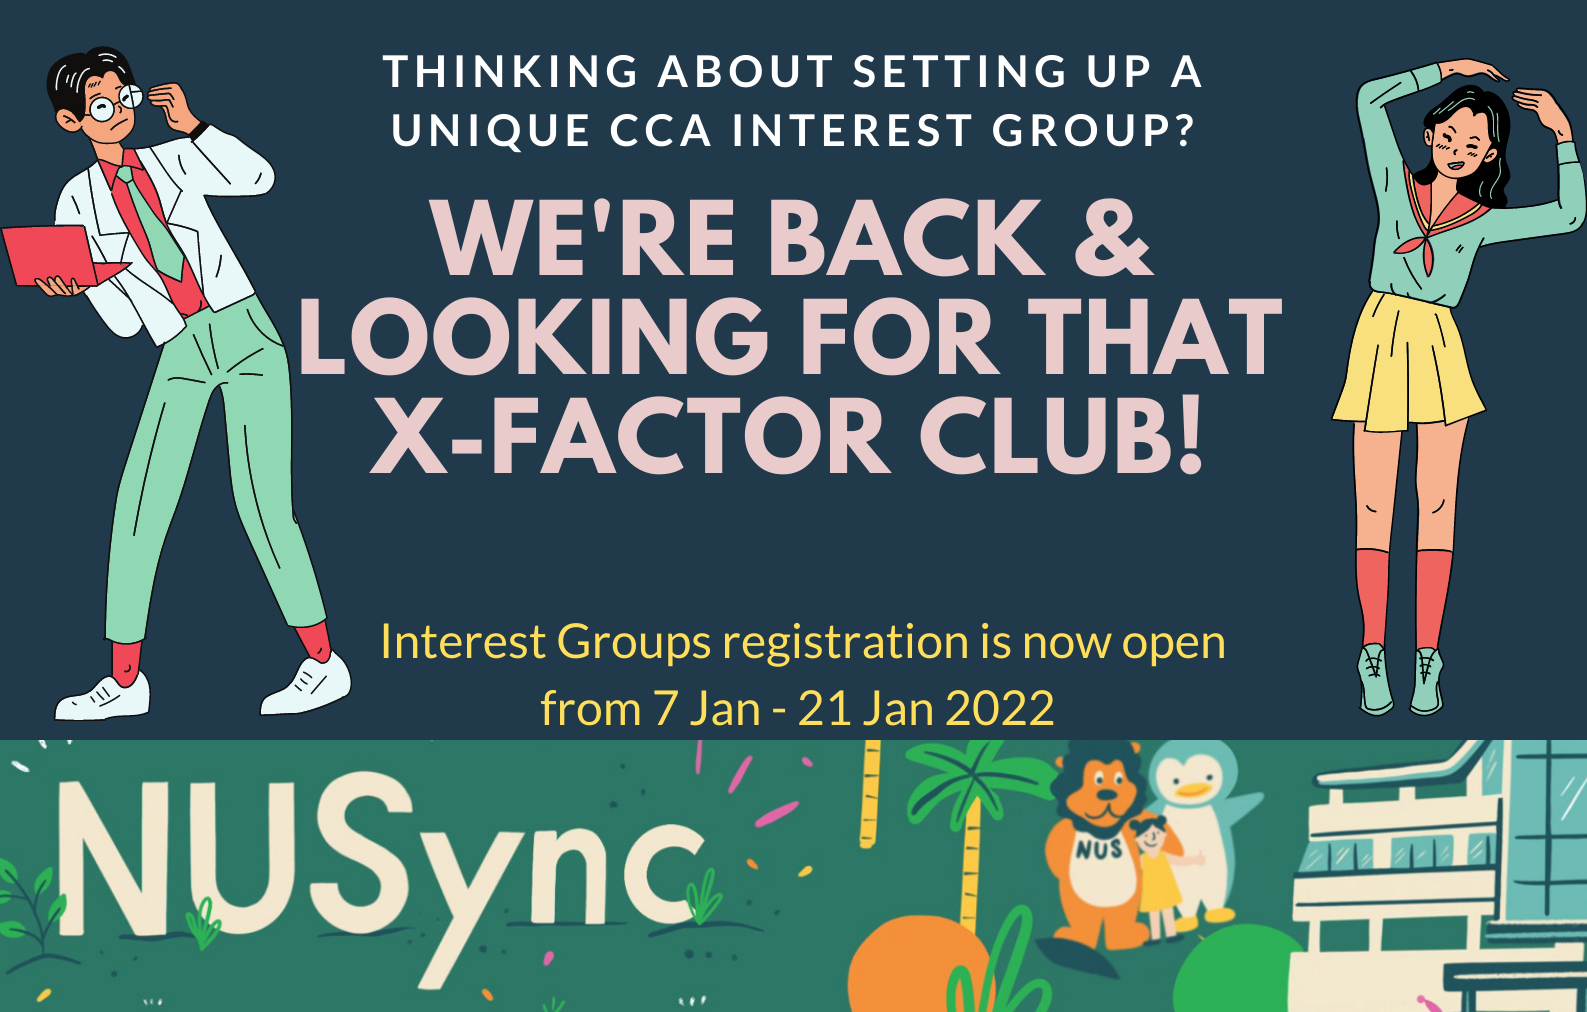 HAve you thought about setting up a unique CCA Interest Group2